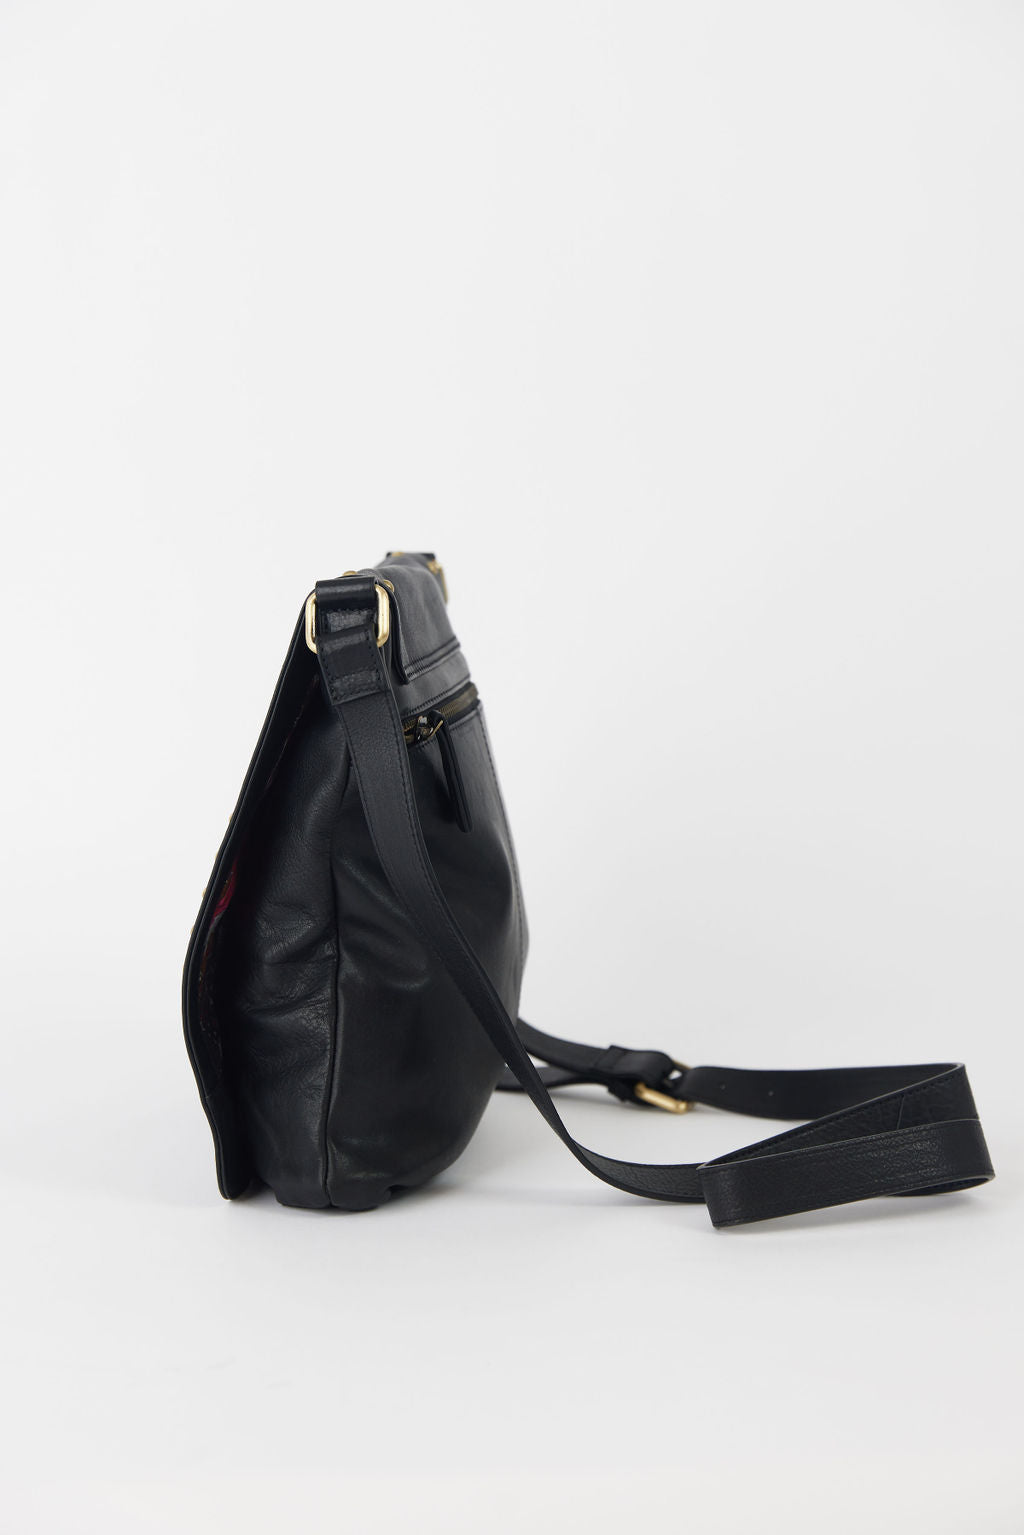 Kingsley Leather Bag Black - EXCLUSIVE TO MINT